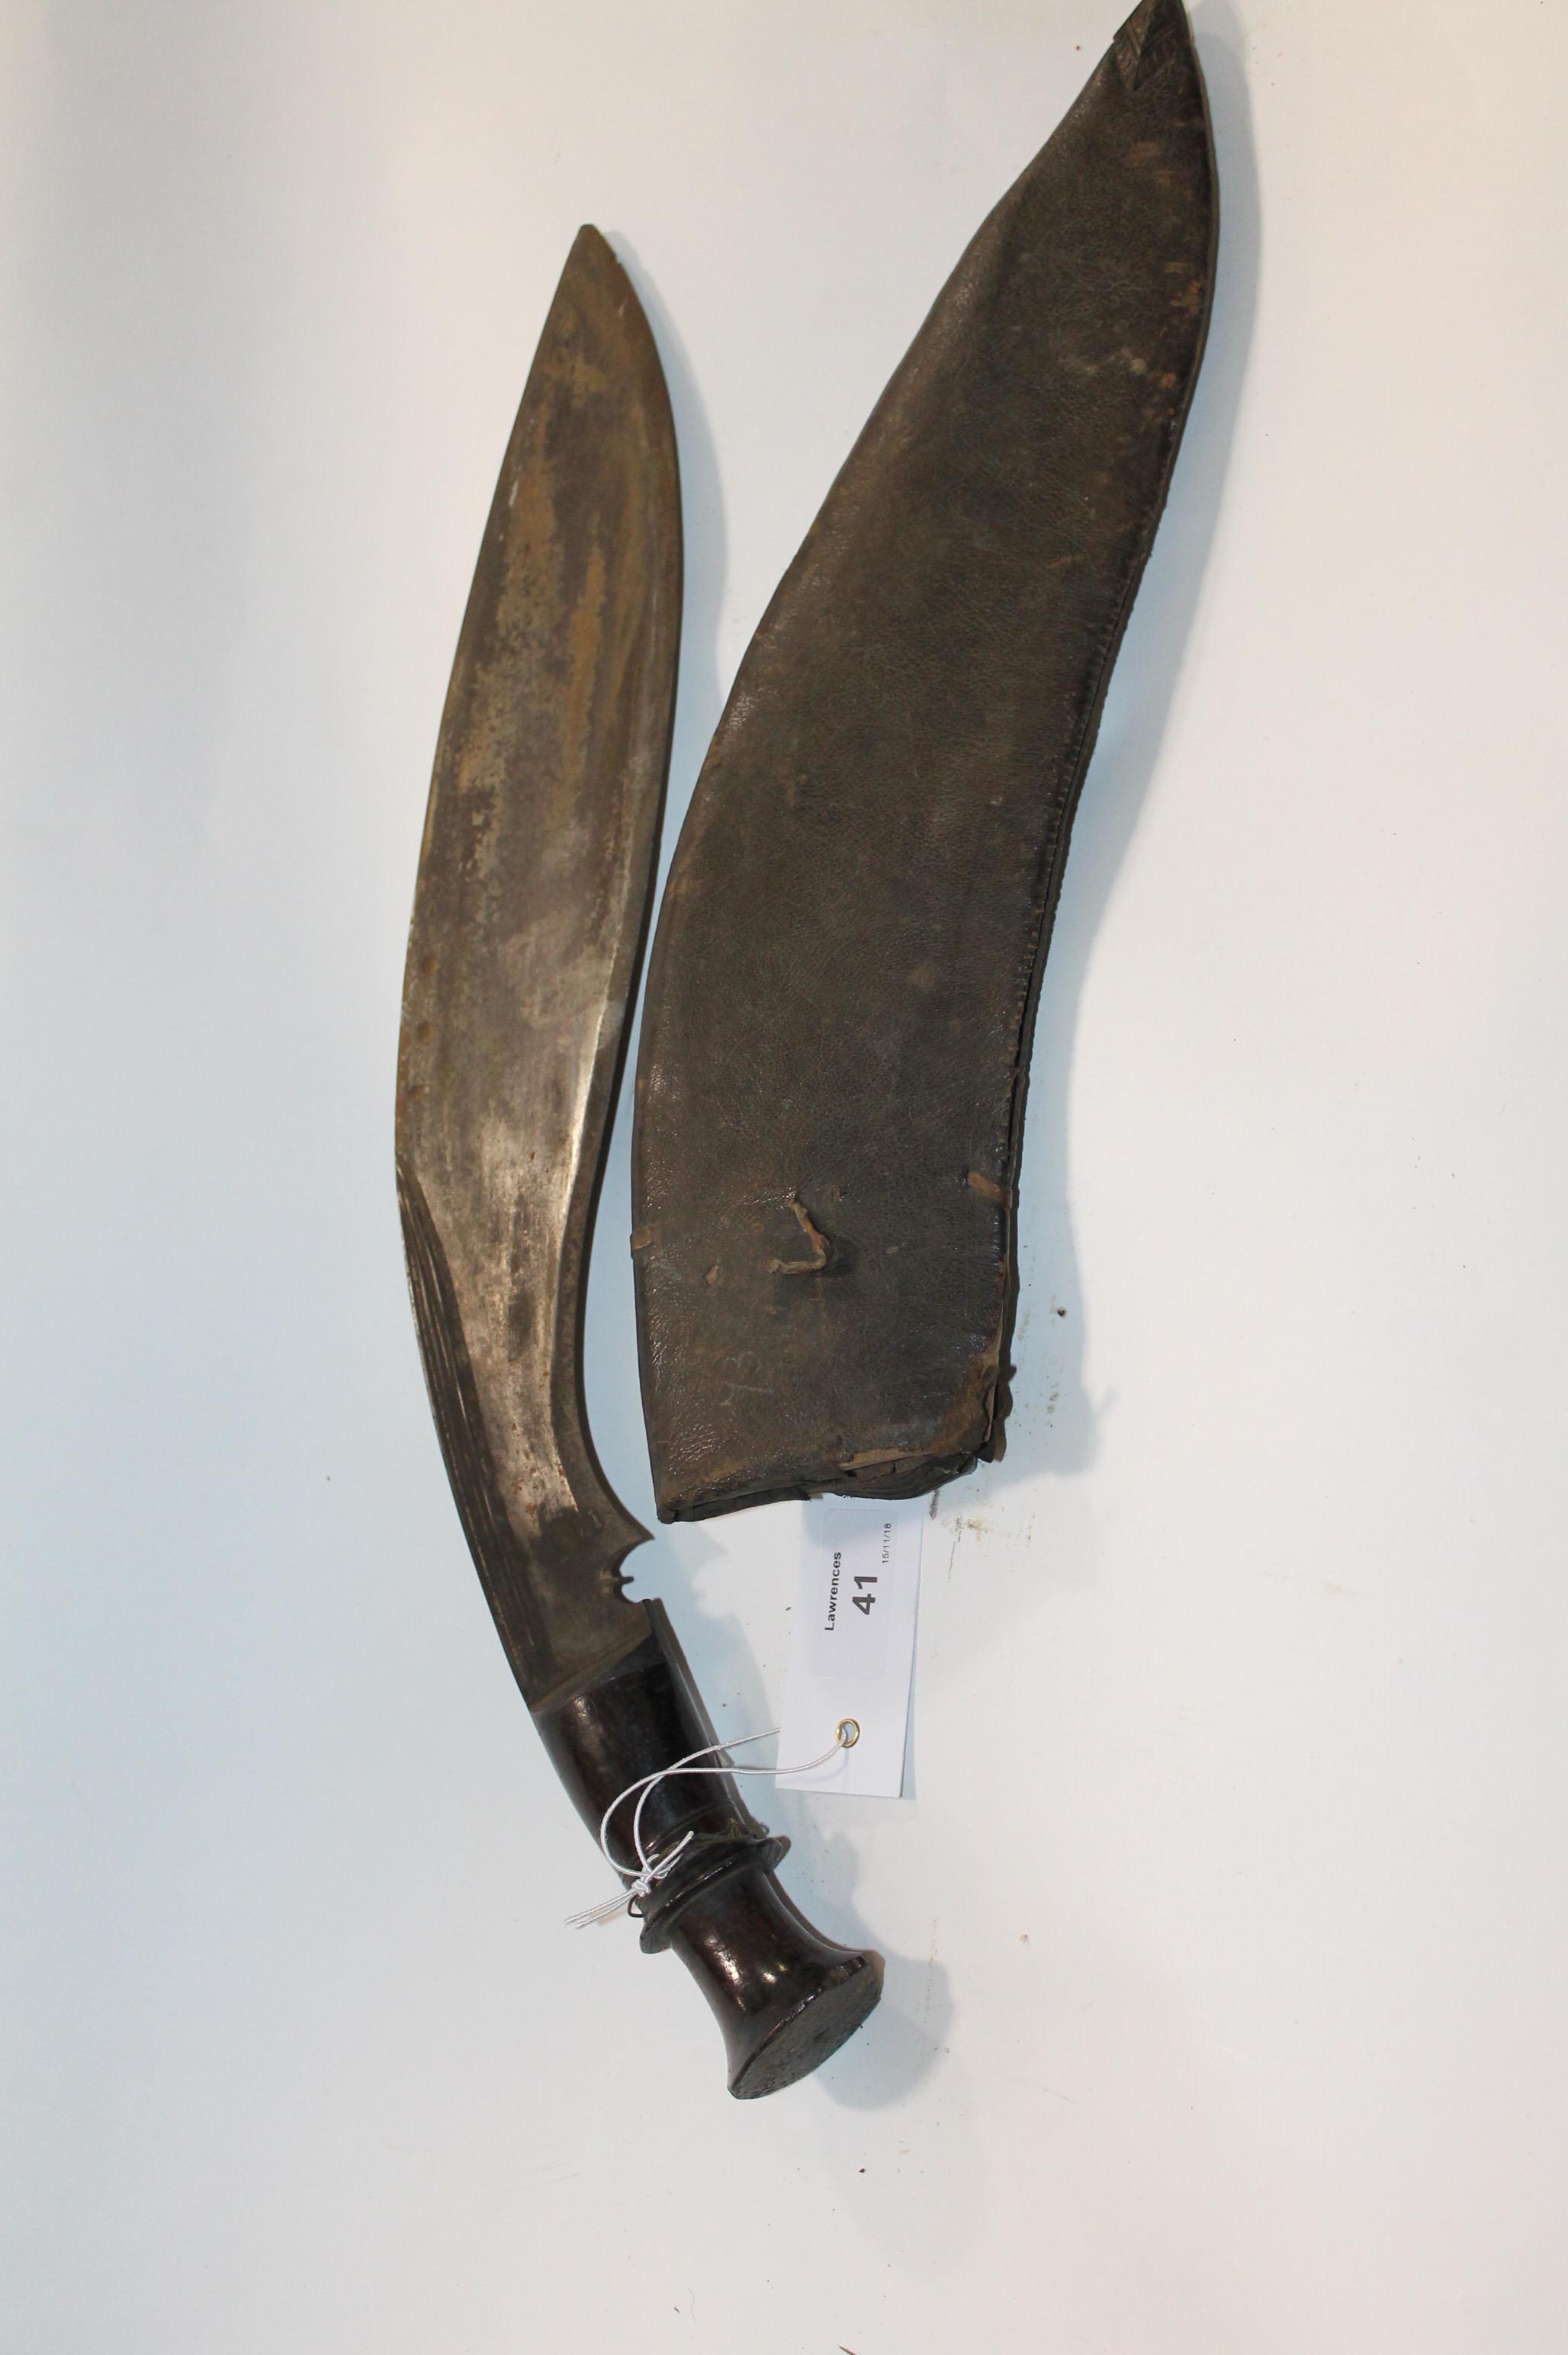 A KUHKRI A 19th/20thC fighting Kuhkri, complete with its sheath. A heavy stained three fullered